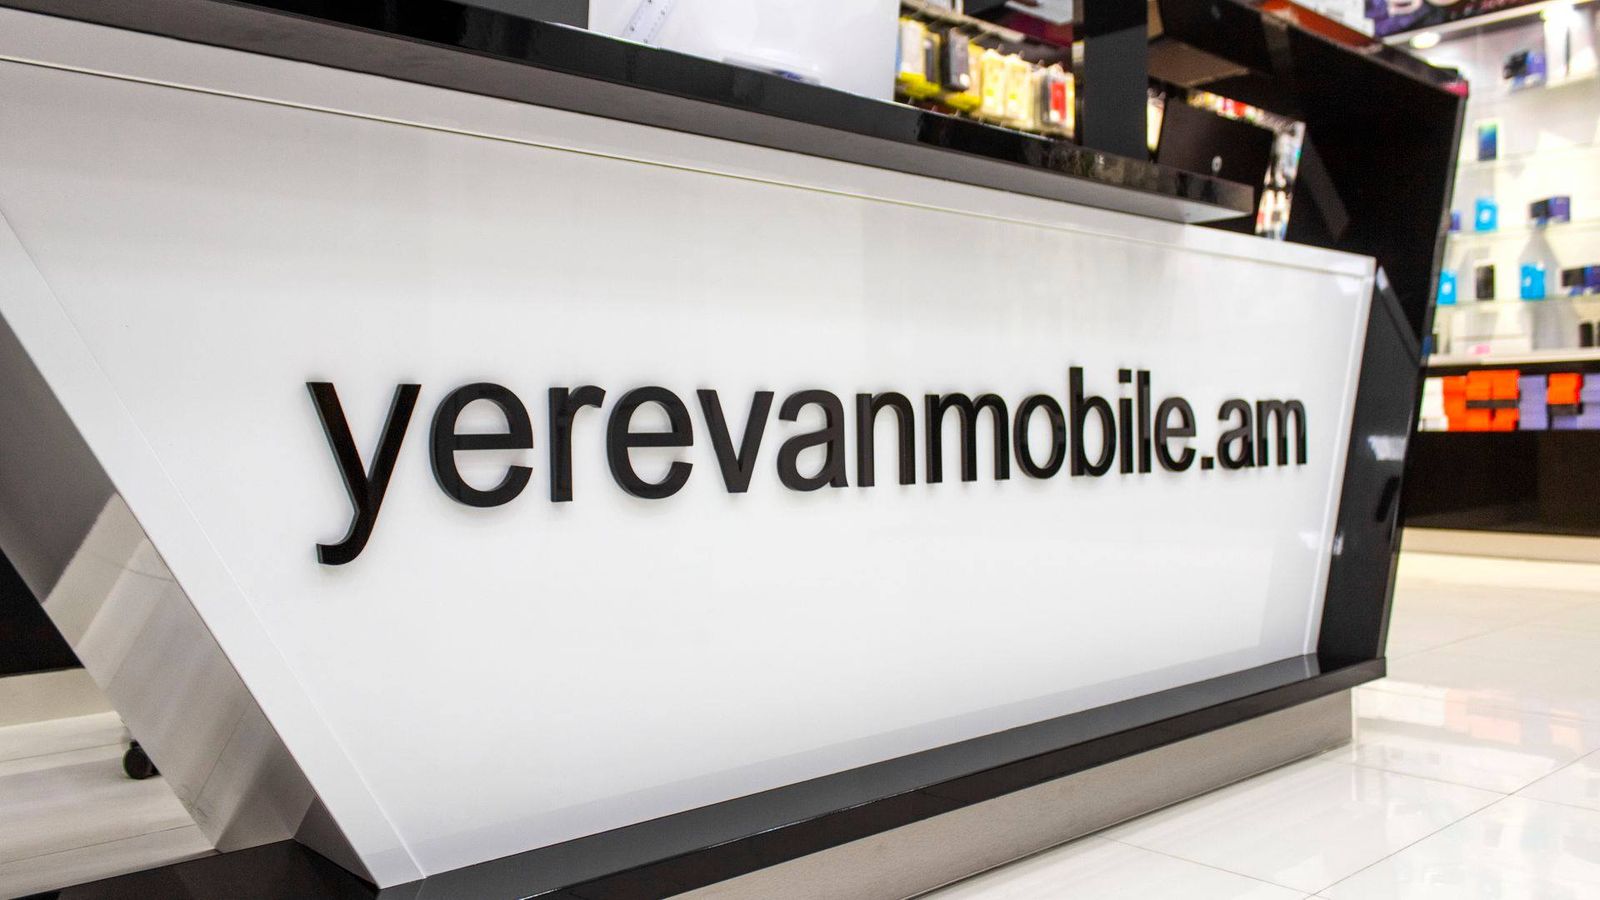 Yerevanmobile 3d acrylic letters in black fixed to the reception desk for office branding